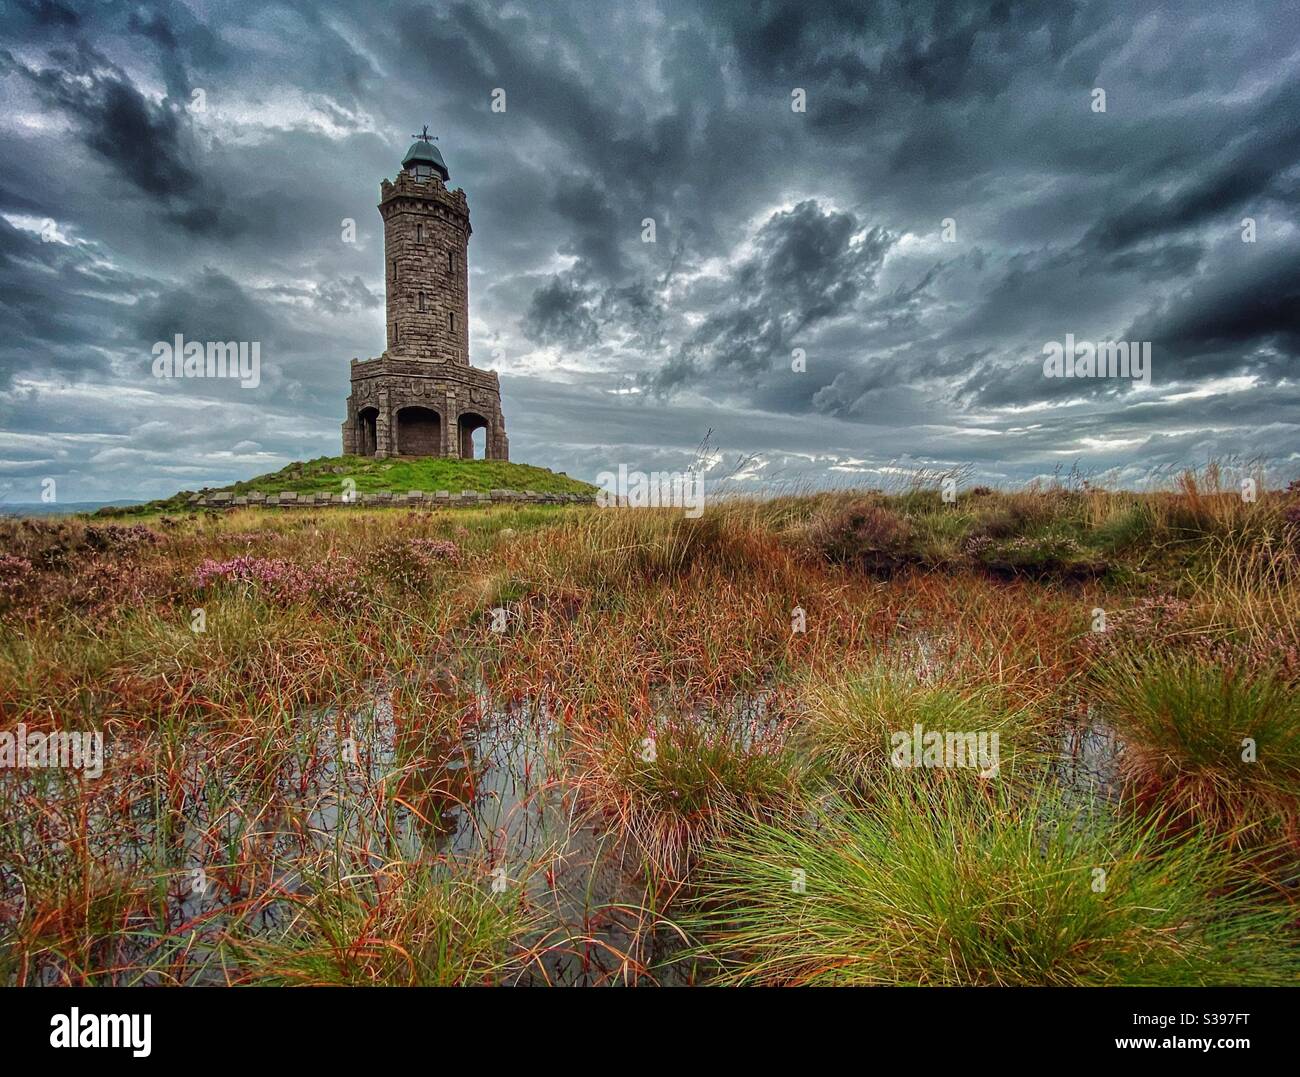 Jubilee Tower (also known as the Rocket) on Darwen Moor above Blackburn in Lancashire on a stormy day Stock Photo